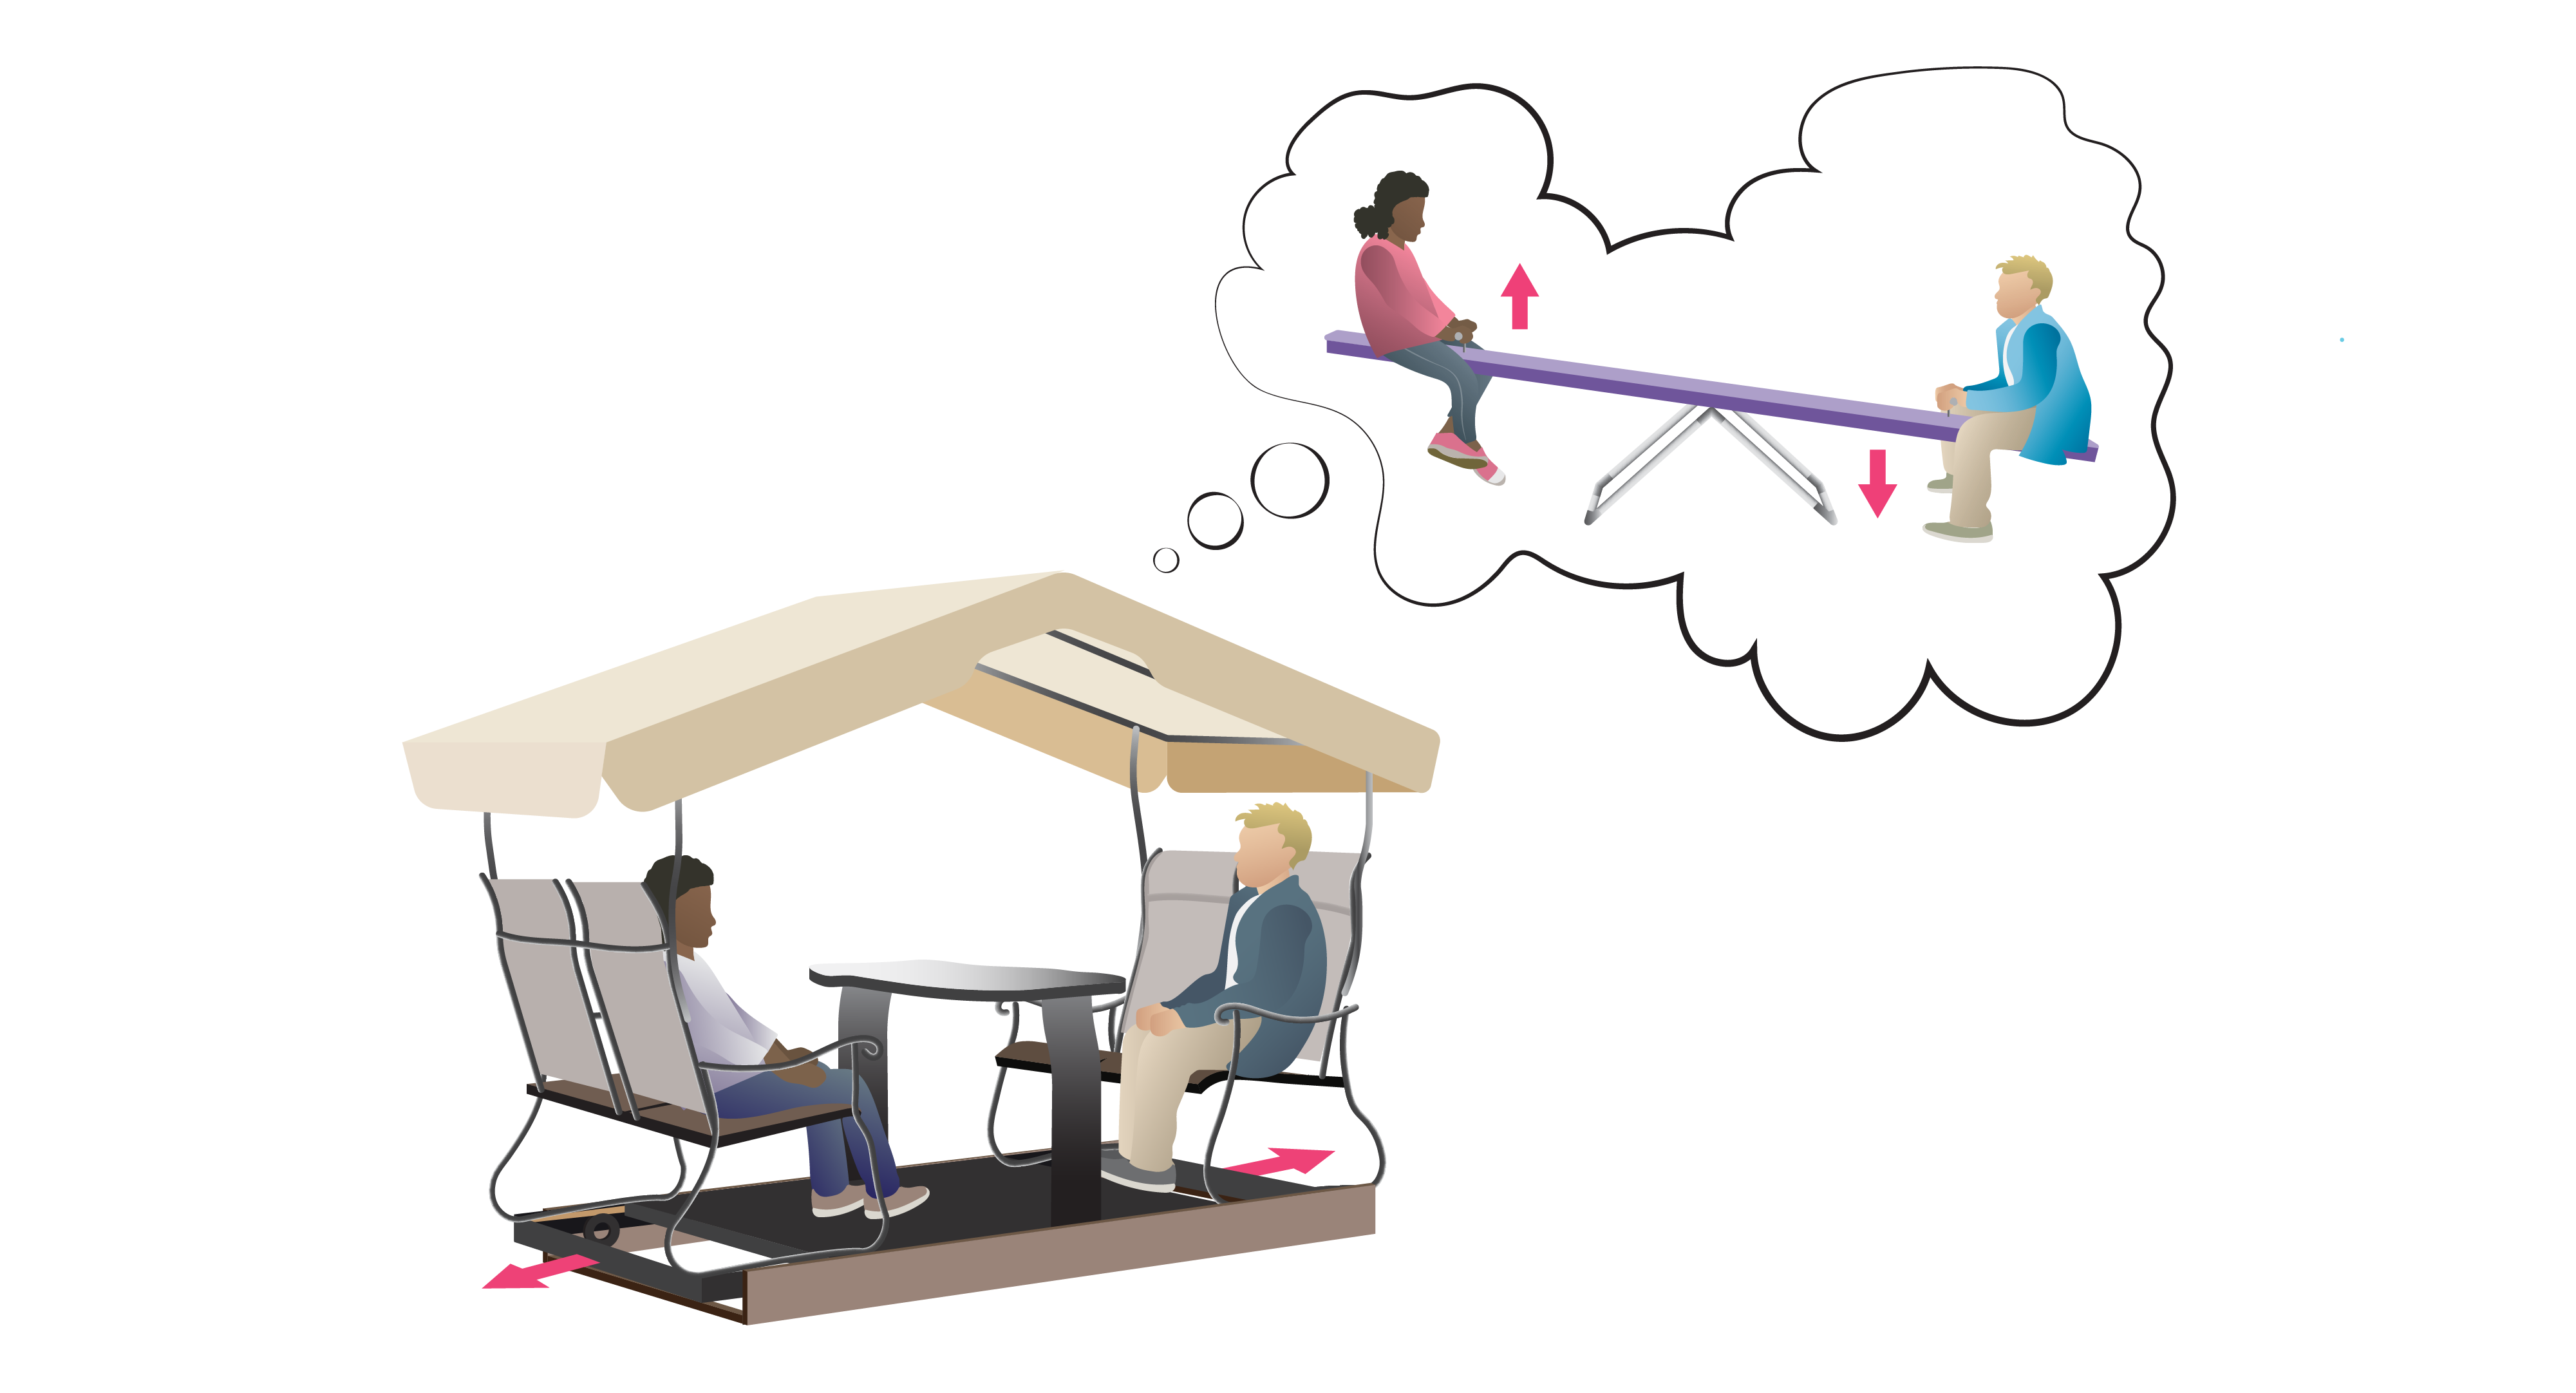 Patio pergola with two chairs on each side and a table in the middle. One person is sitting on either side. At the base of the pergola are pink arrows pointing in a back-and-forth motion. Coming out from the top of the pergola is a thought-bubble with two people sitting on a teeter-totter. Two red arrows are seen on either side of the teeter-totter: one pointing up, the other pointing down.